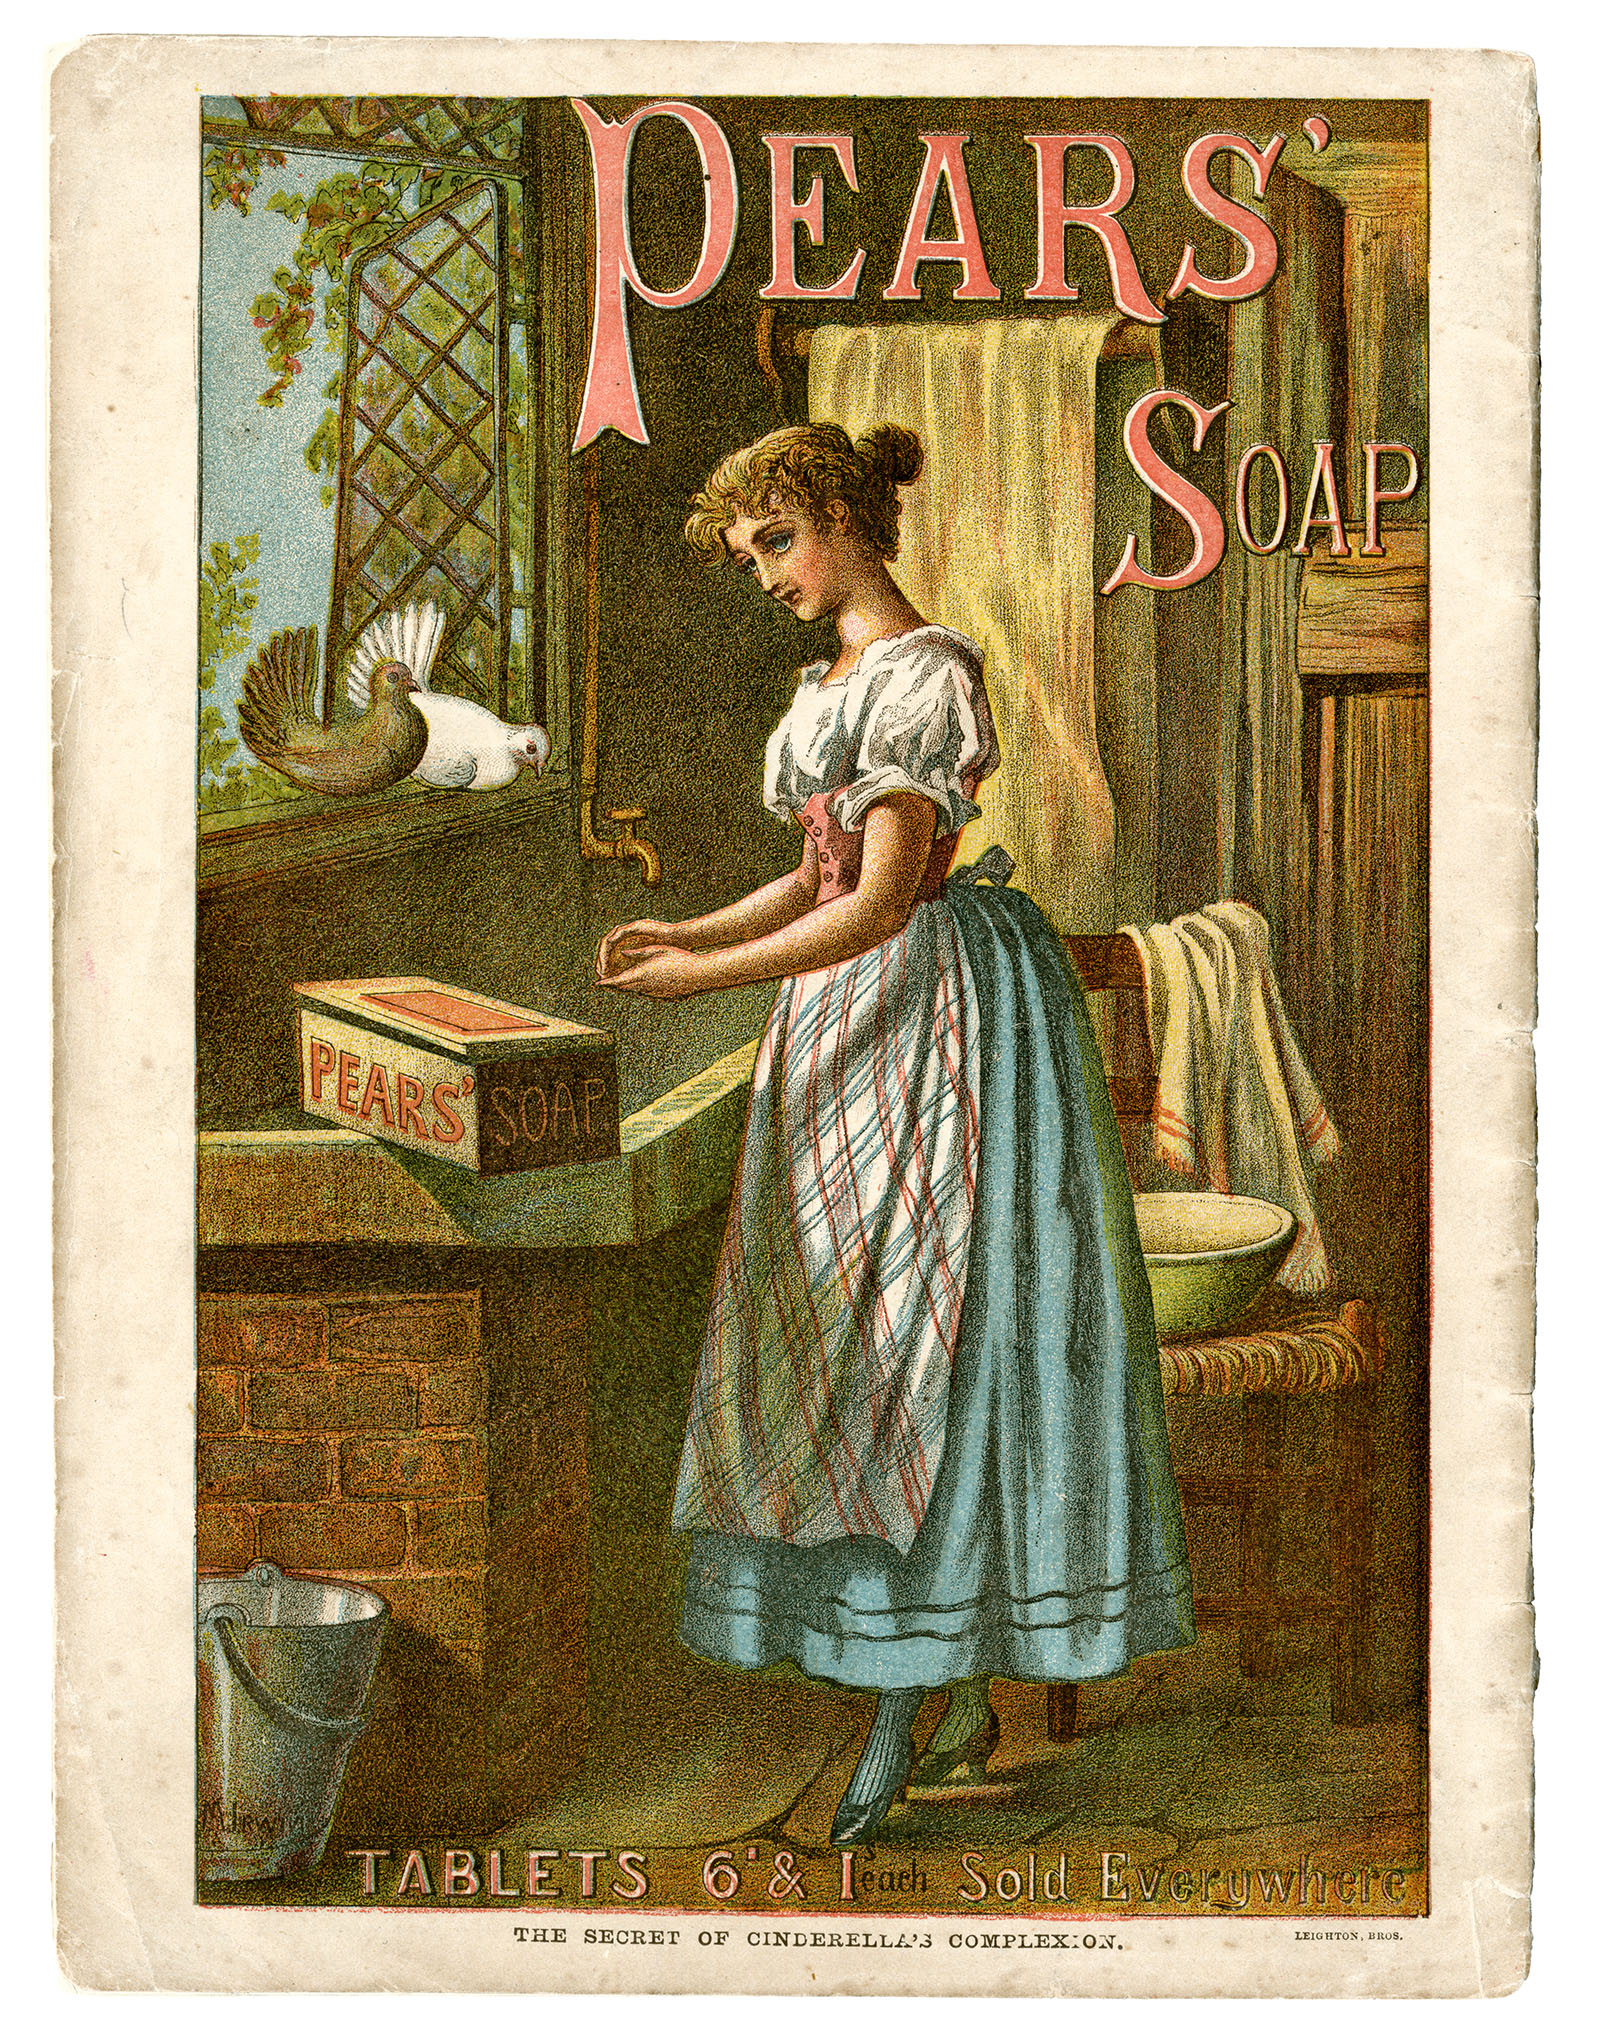 pears is one of the world's oldest beauty products